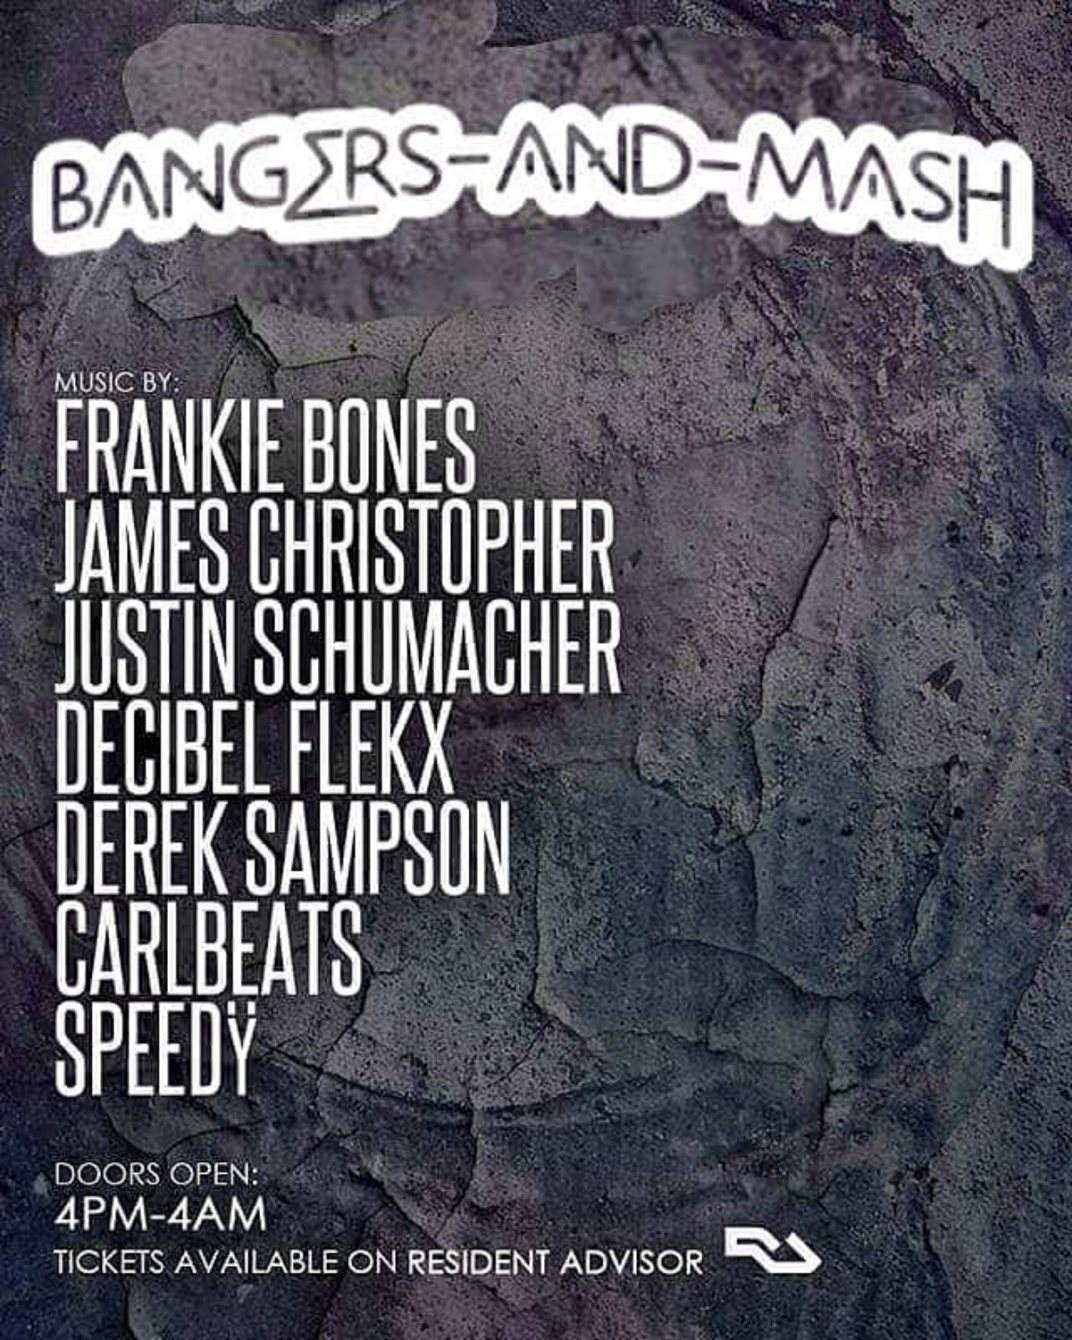 [CANCELLED] Bangers and Mash - フライヤー裏